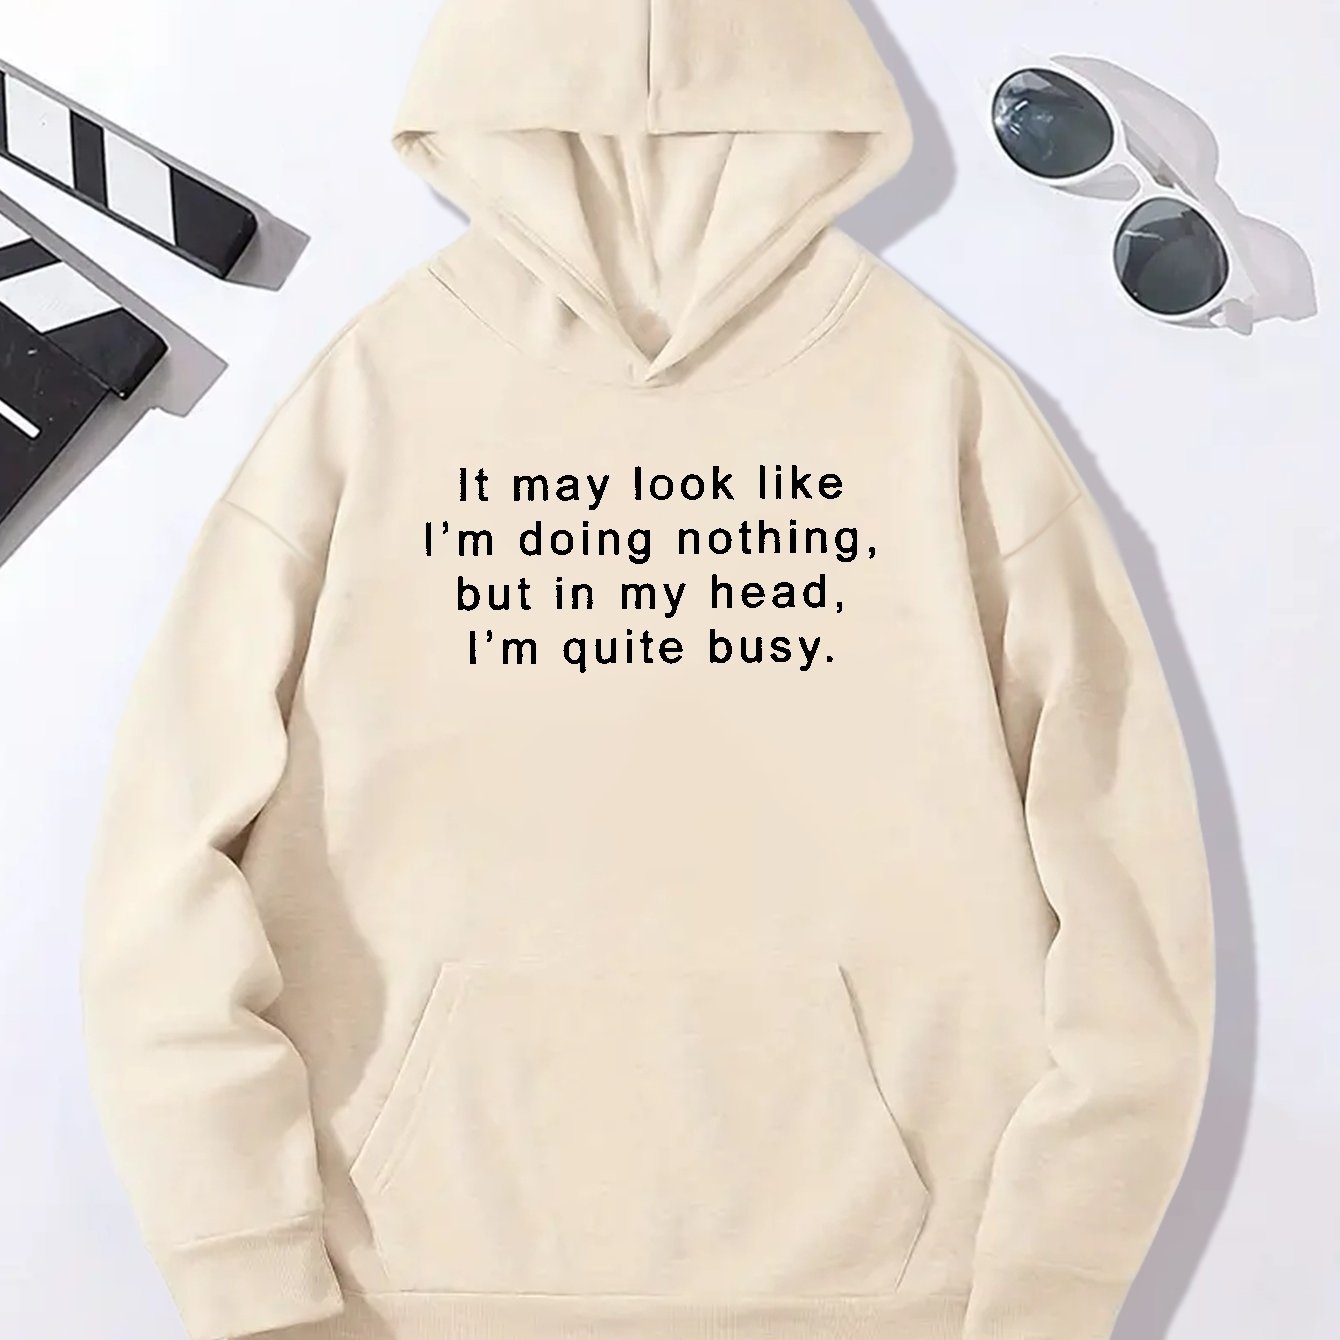 It May Look Like I'm Doing Nothing But In My Head I'm Quite Busy Print,  Men's Crew Neck Sweatshirt, Streetwear Pullover With Long Sleeves, Slightly